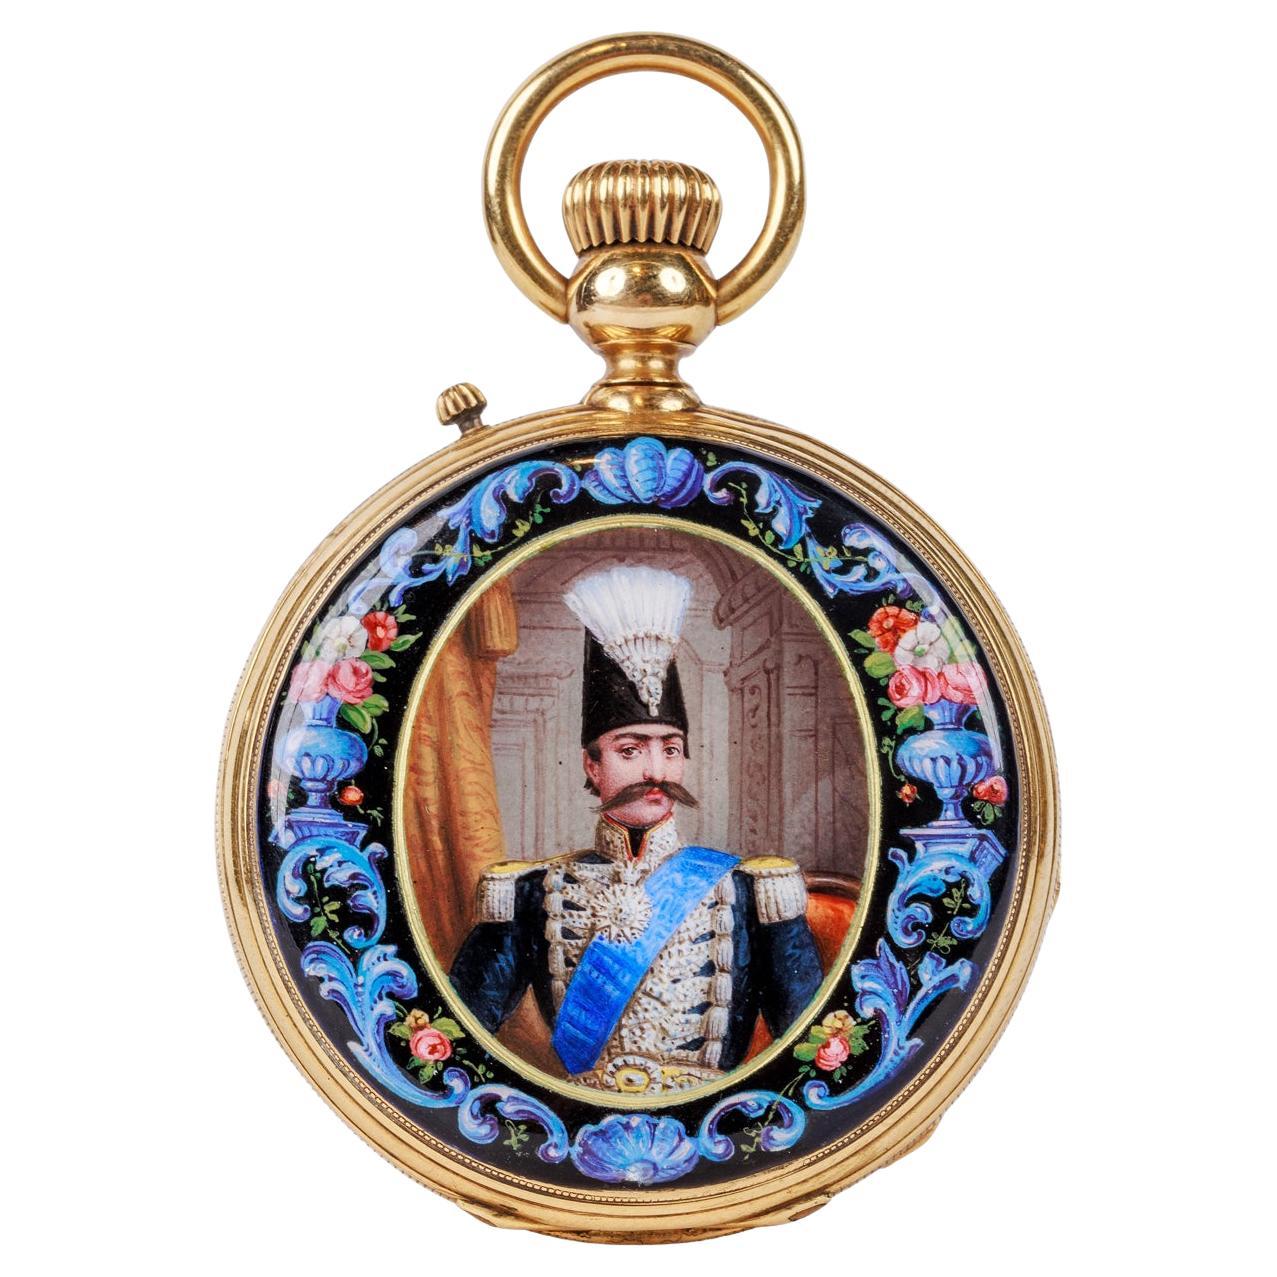 Rare Gold and Enamel Presentation Pocket Watch with Portrait of Naser Shah For Sale